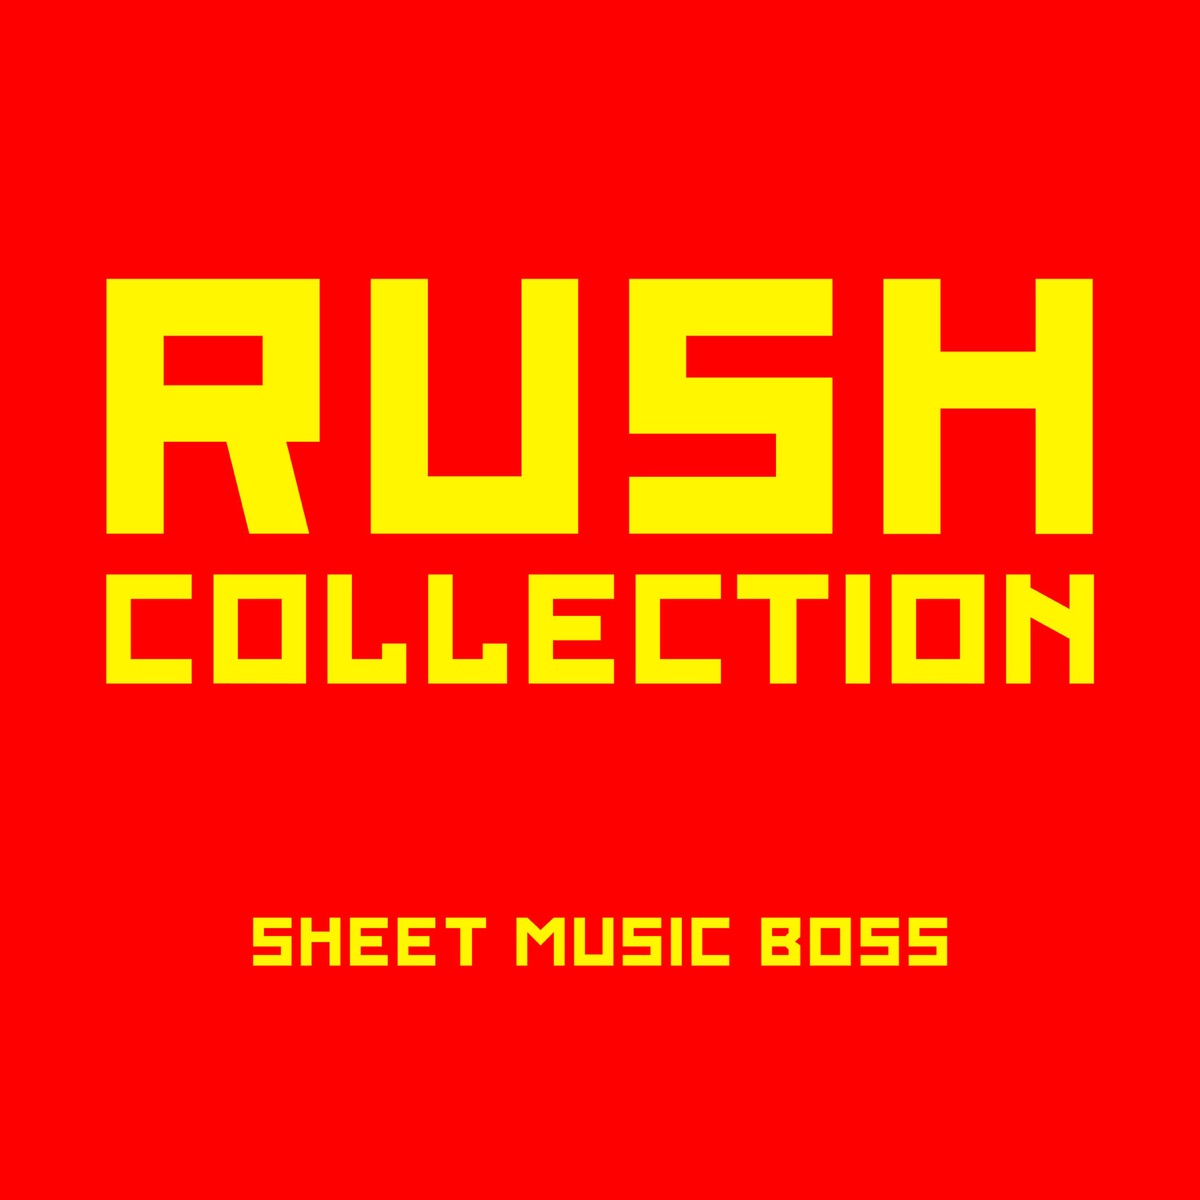 Rush Collection by Sheet Music Boss on Apple Music